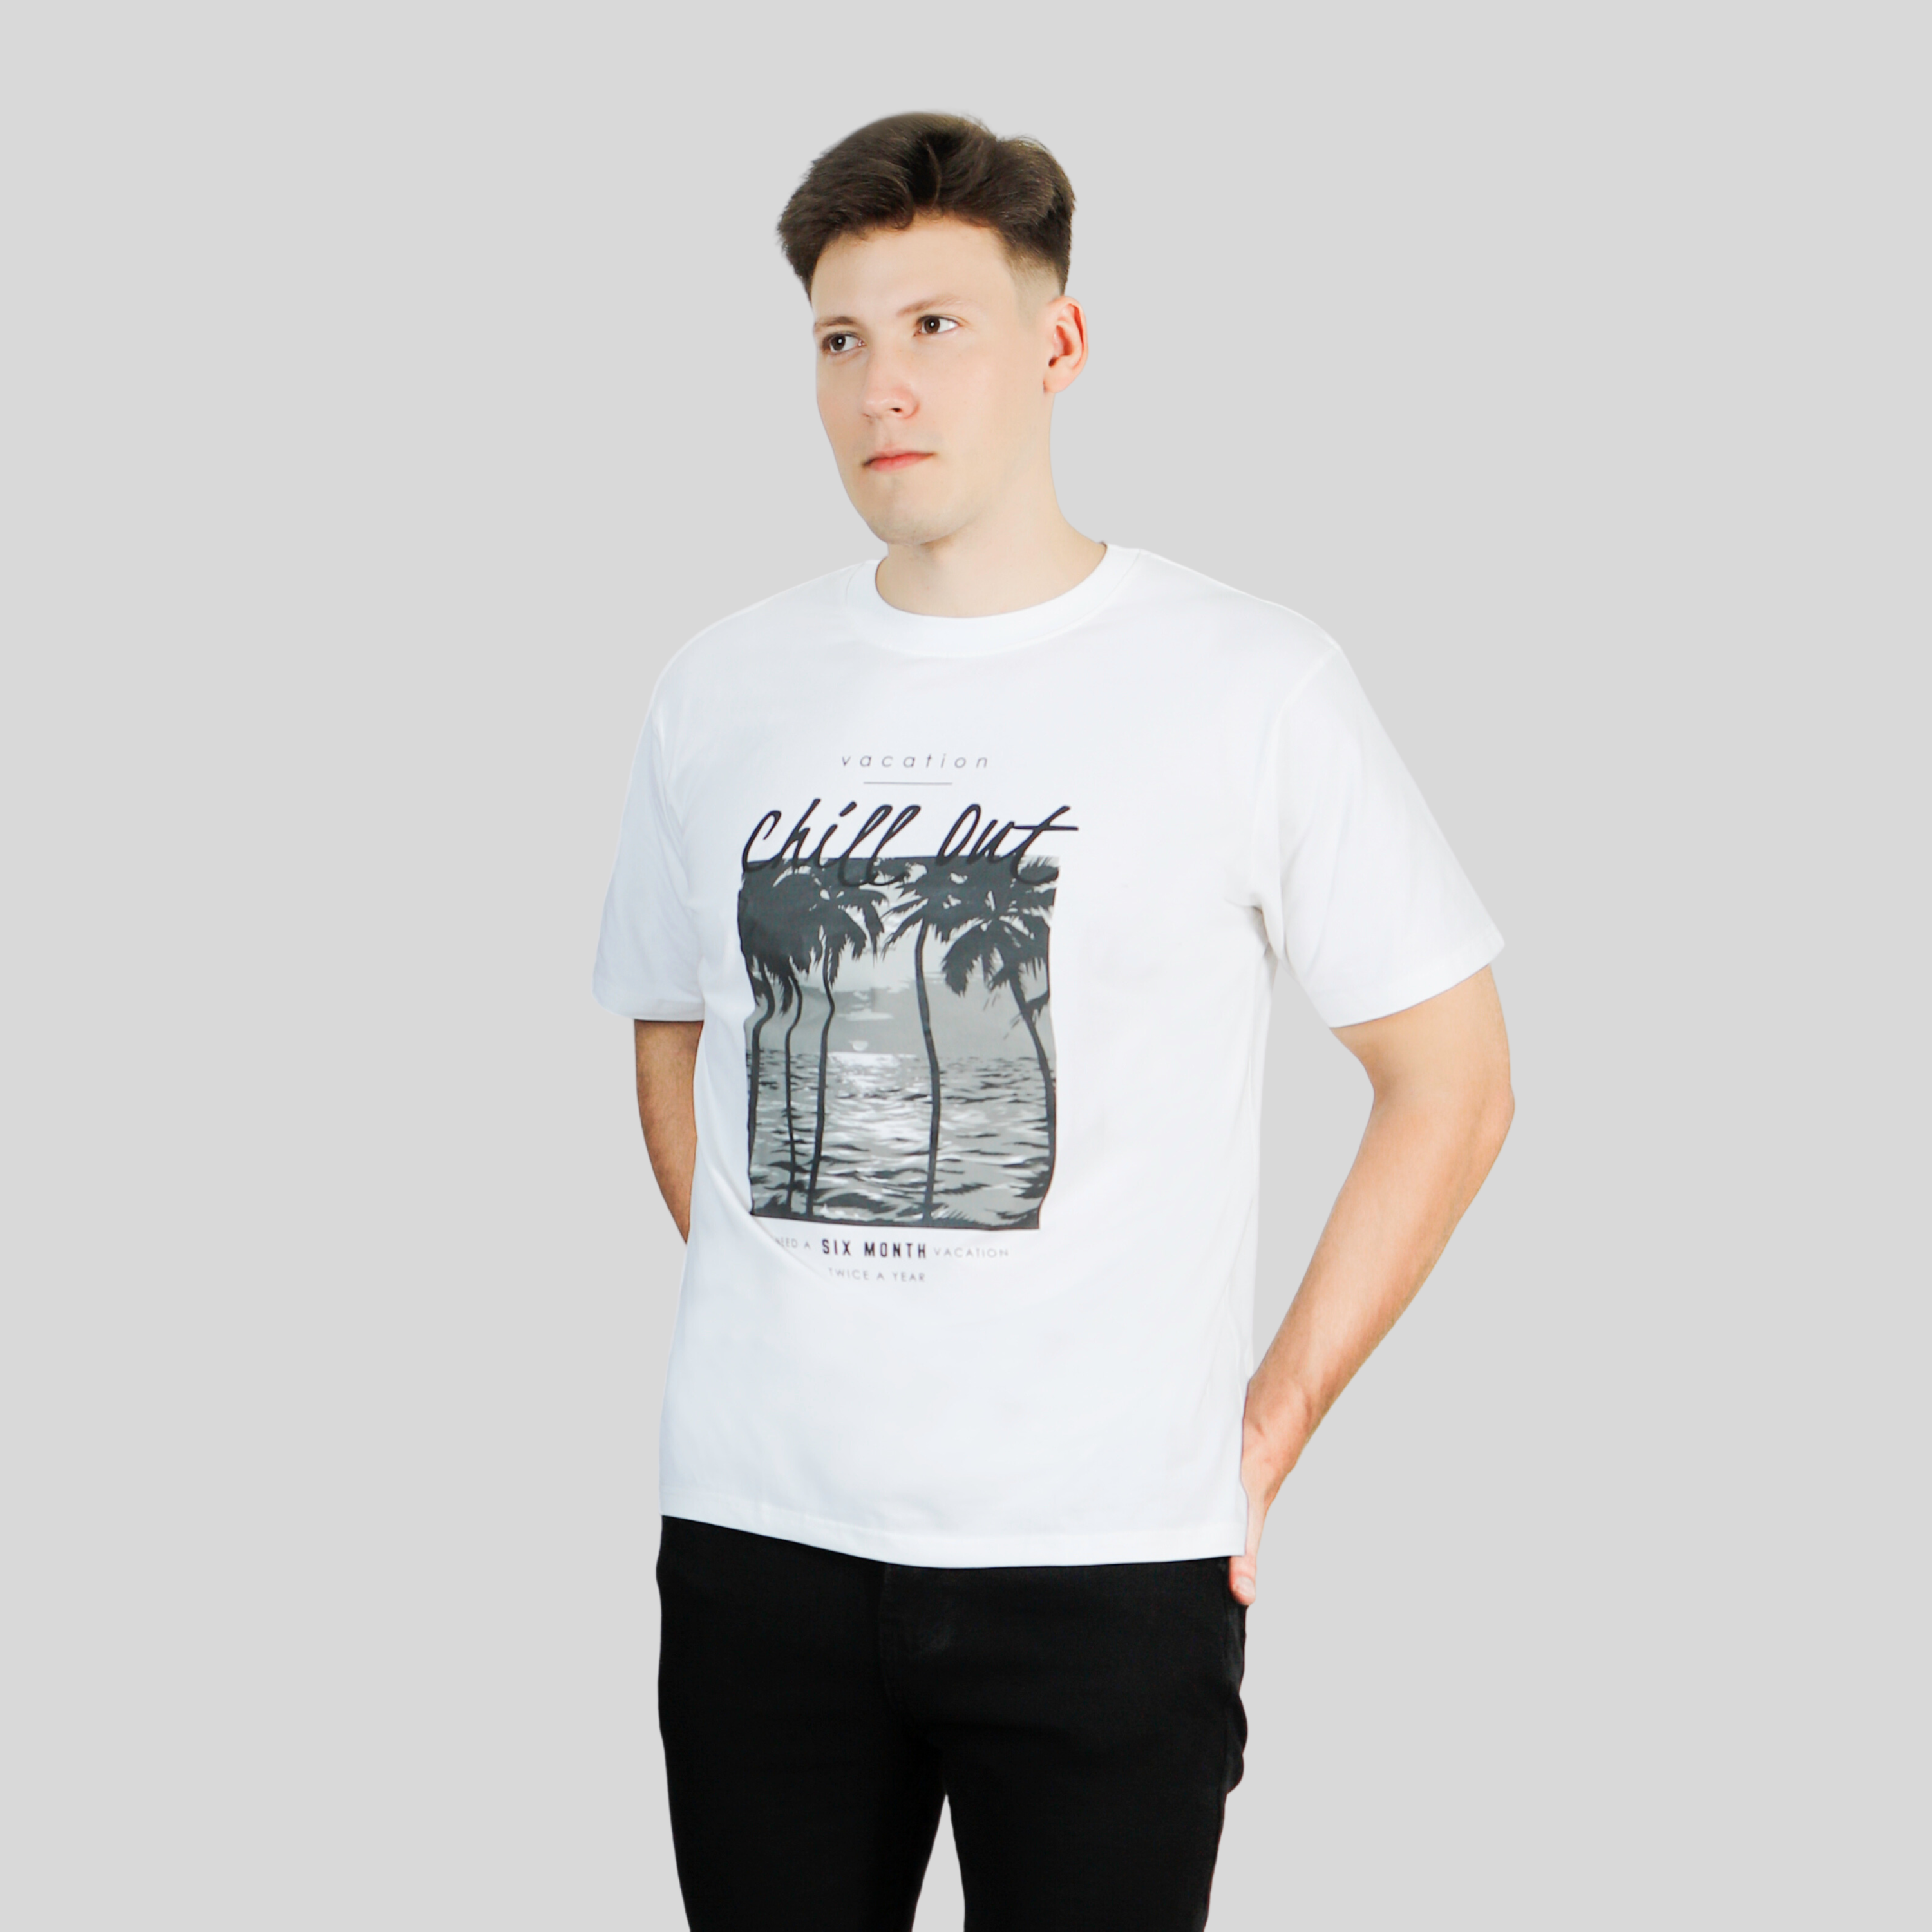 Áo thun nam in họa tiết Old Sailor - O.S.L  CHILL OUT TEE - WHITE - ATGA26014 - trắng - Big size upto 5XL